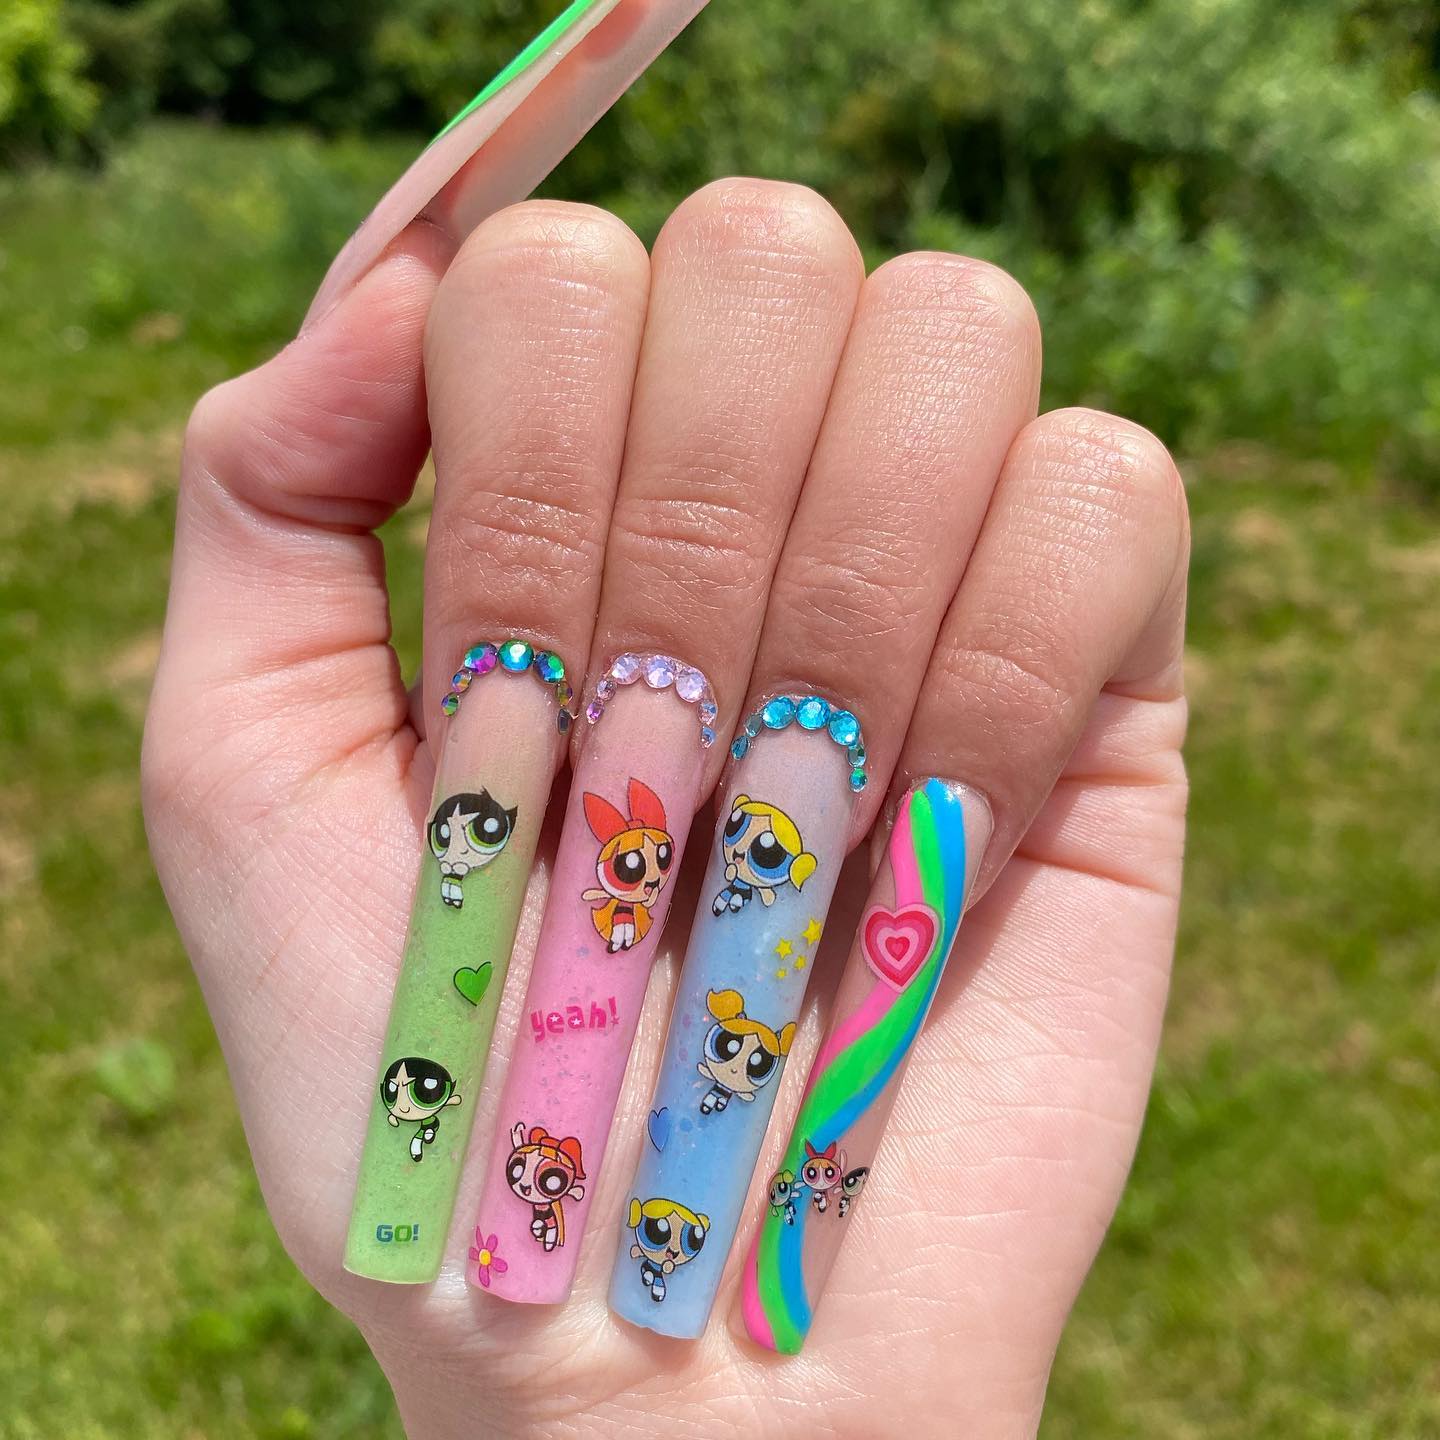 These acrylic nails may scare you but just look at these stickers! If you like Powerpuff girls, you should definitely go for it.